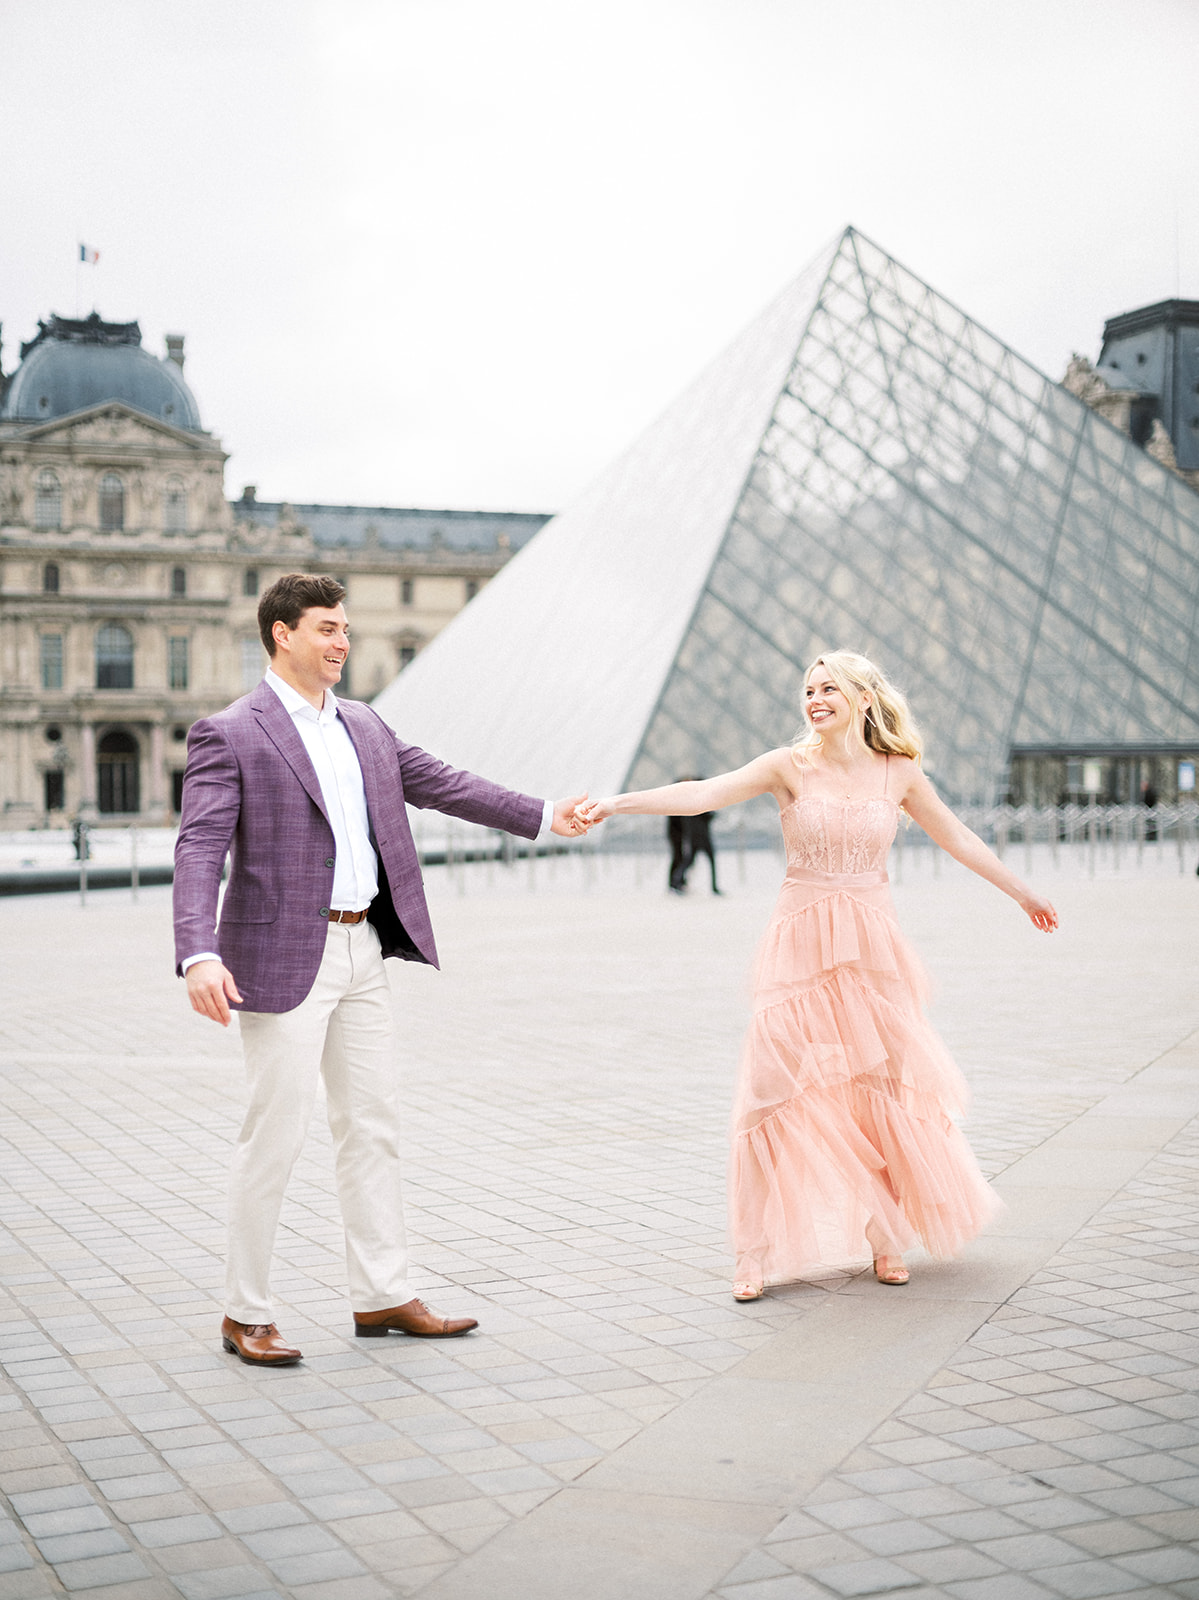 Man spins woman in front of the Louvre.